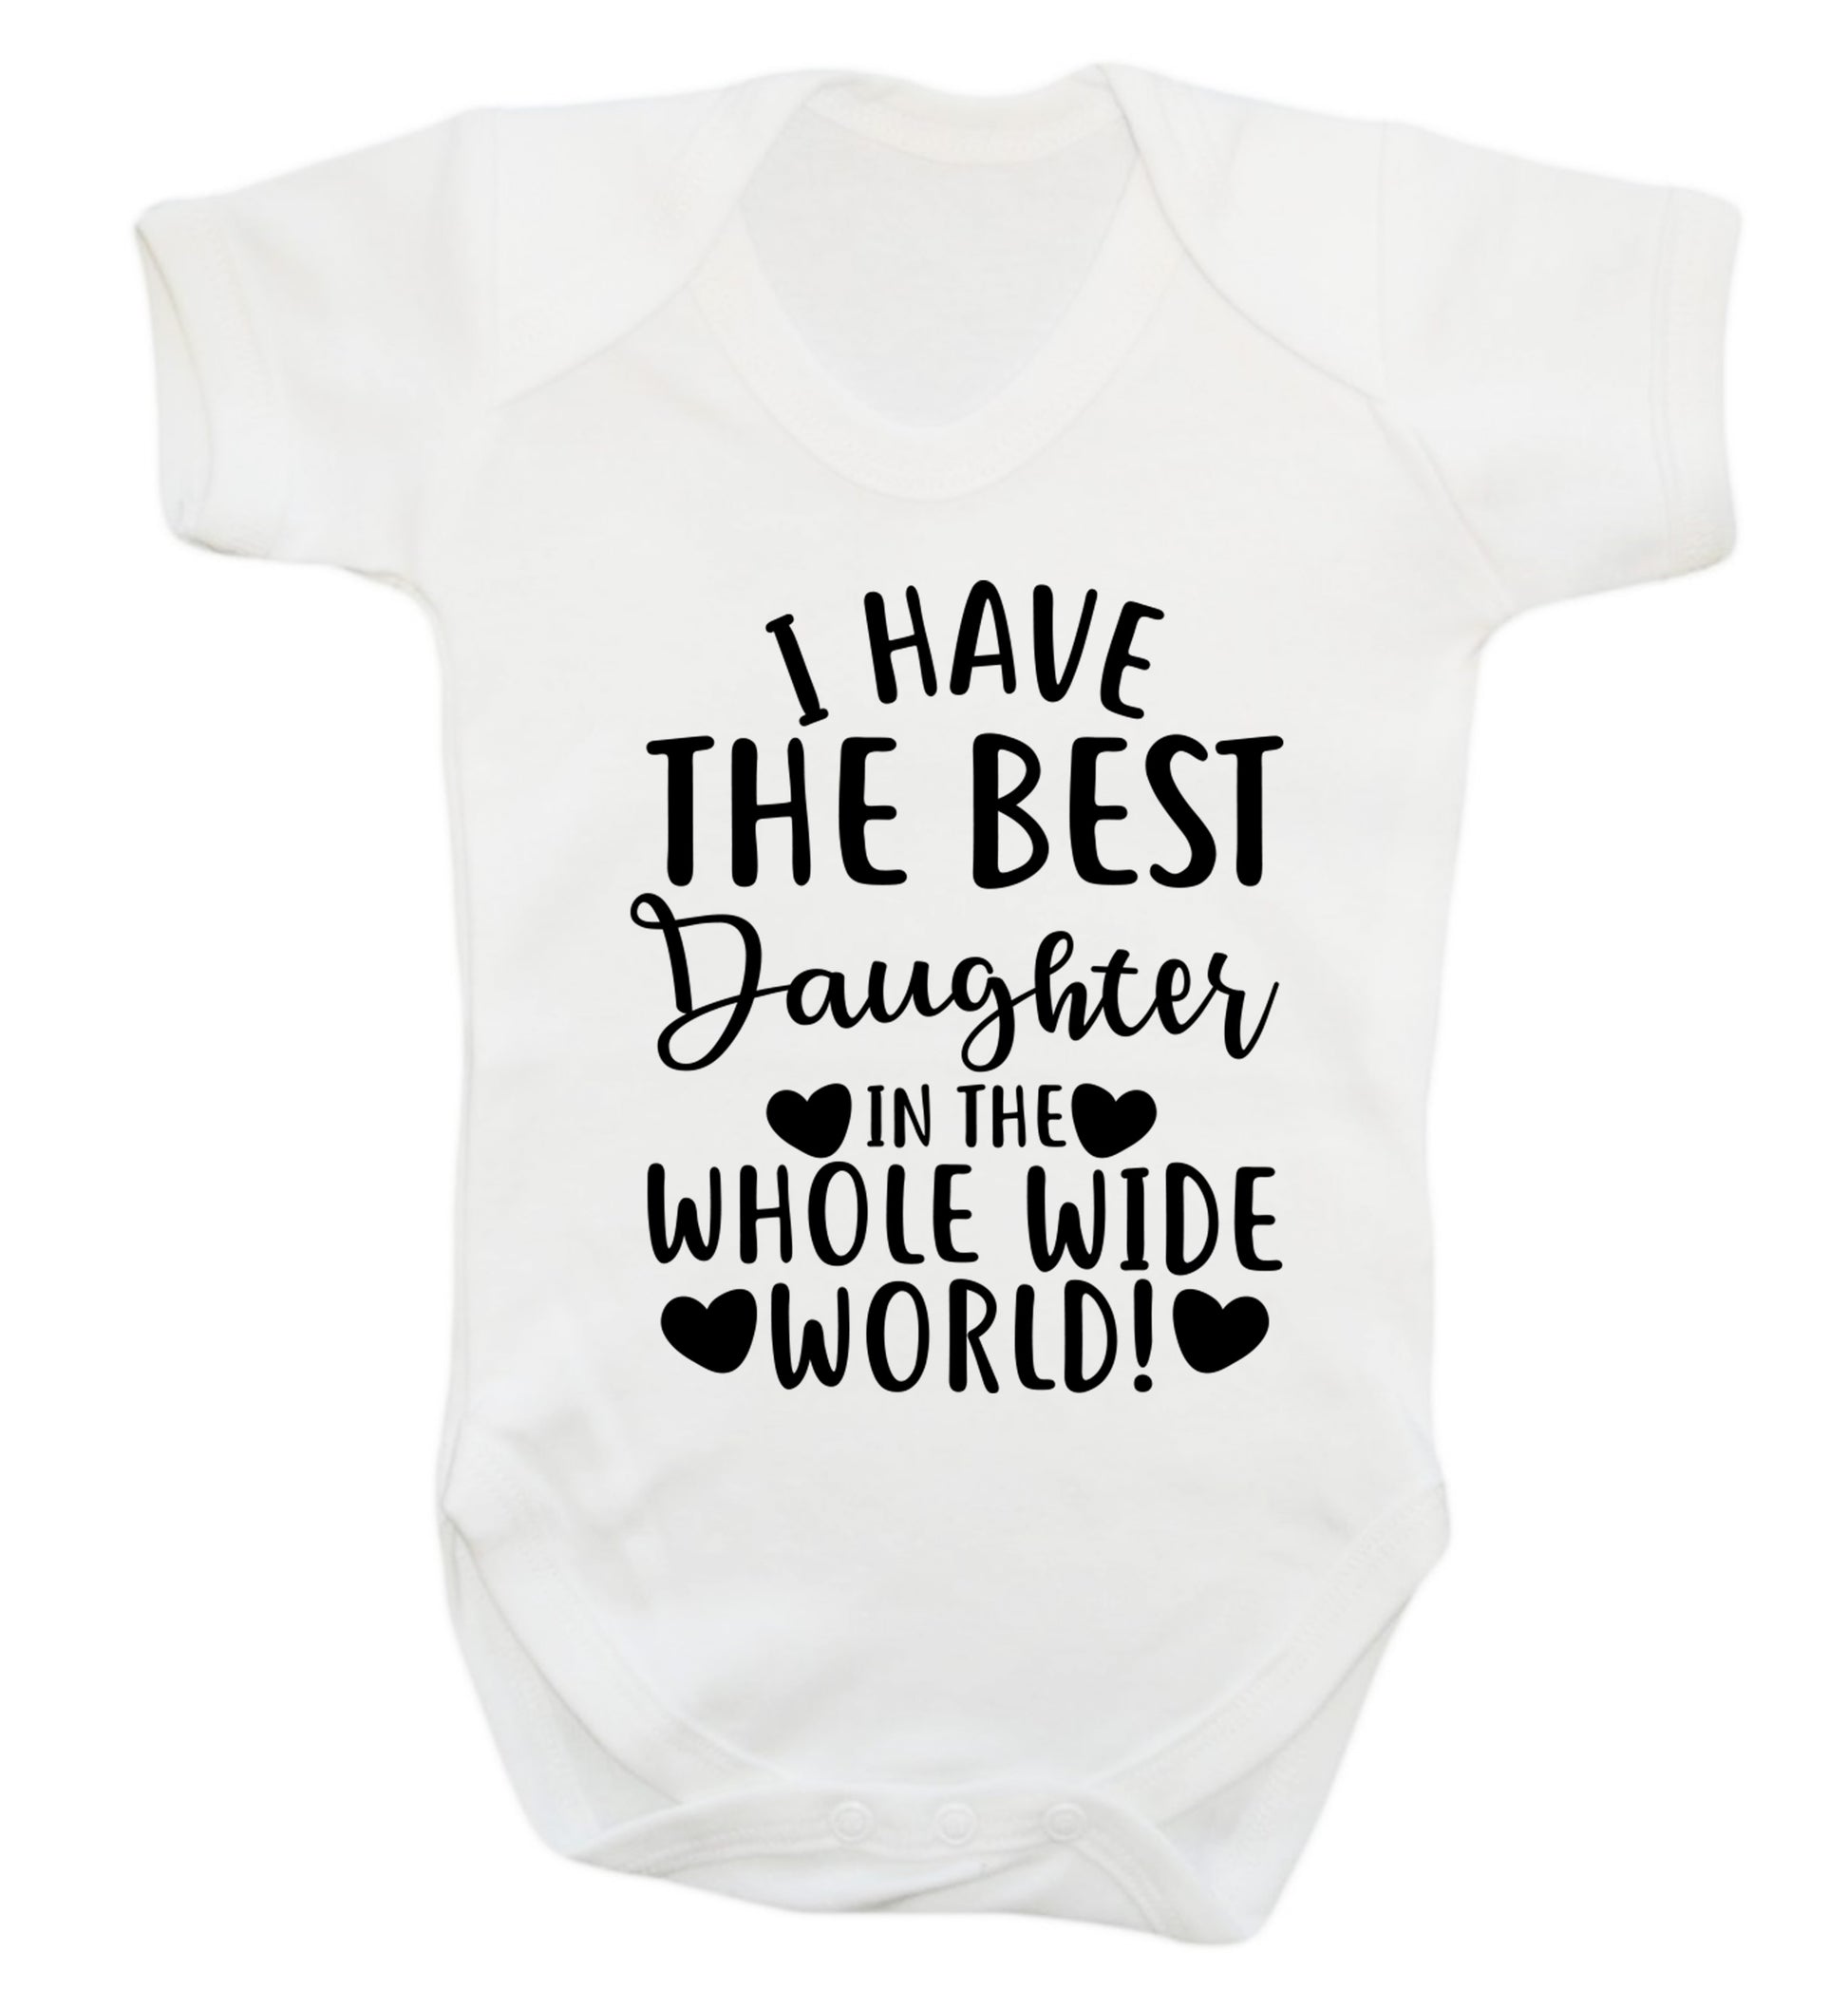 I have the best daughter in the whole wide world! Baby Vest white 18-24 months